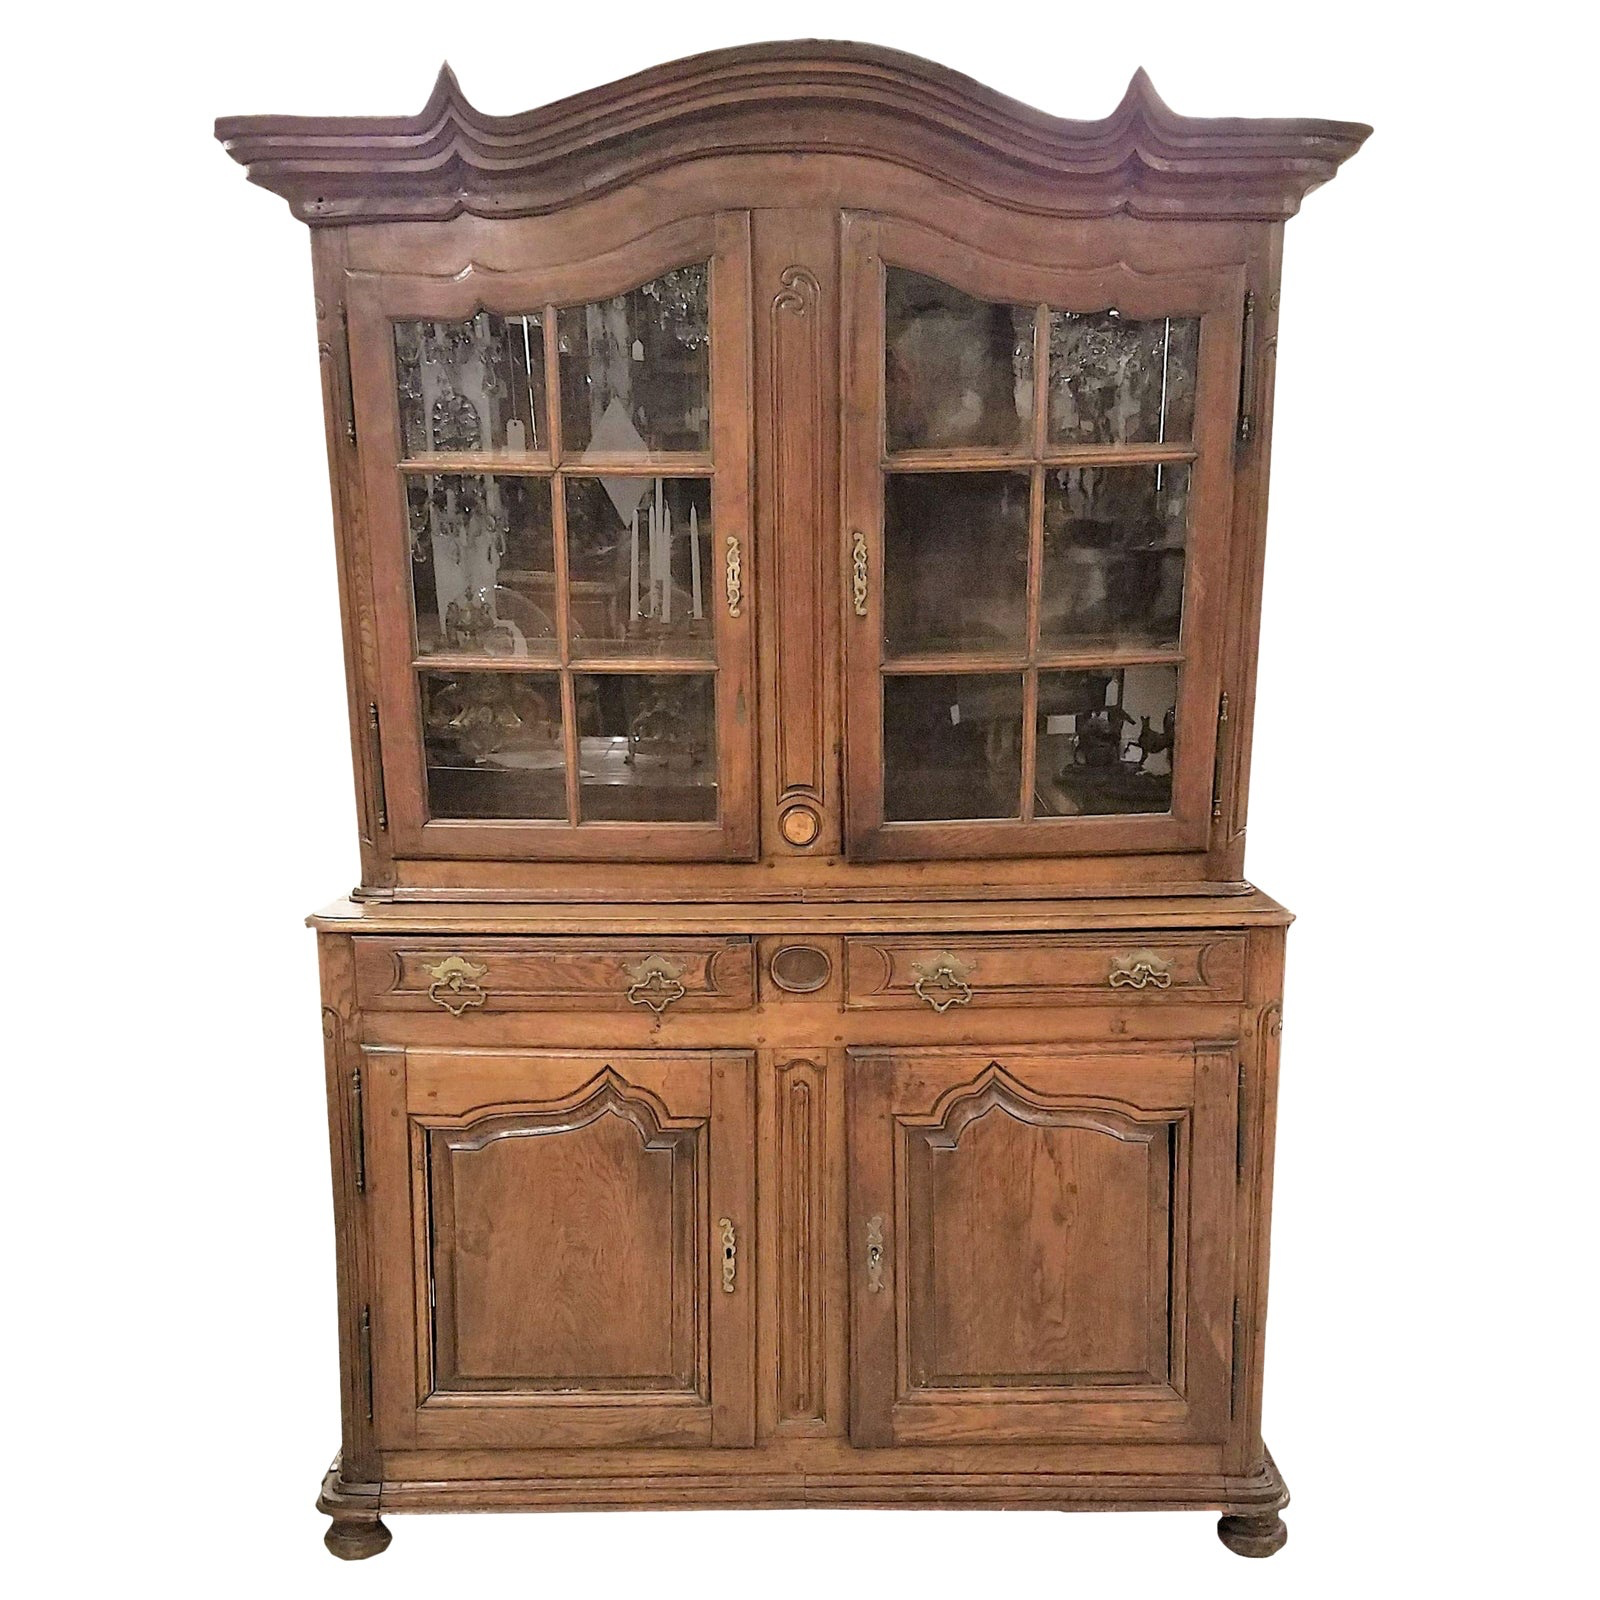 Circa 1760 French Provincial Oak, Dresser With Glass Front